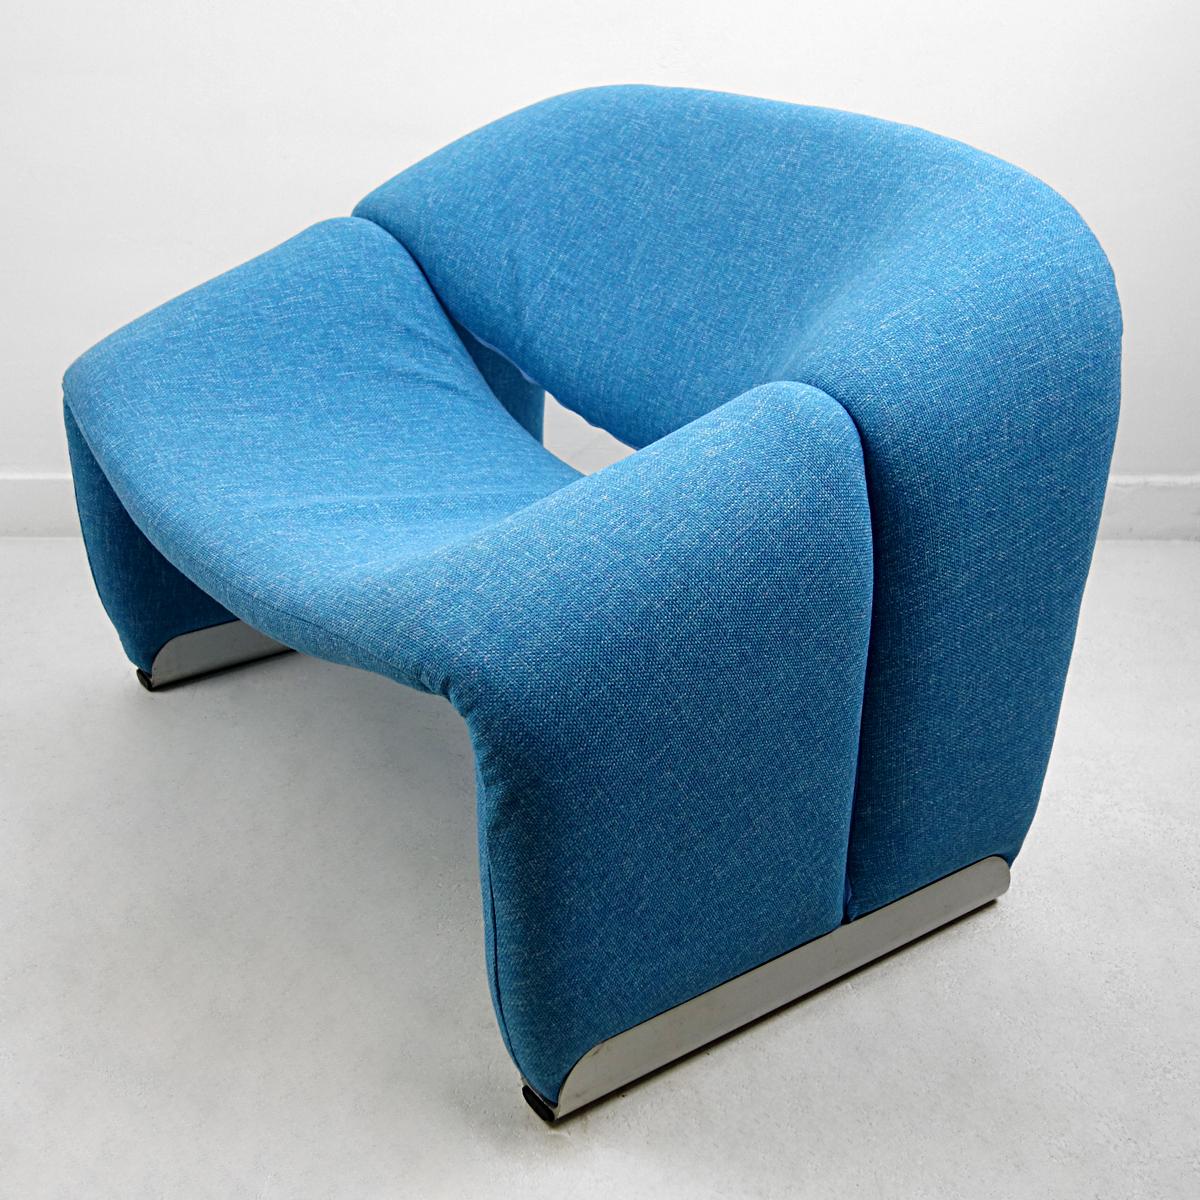 Mid-Century Modern Pair of Groovy Chairs F598 in Blue Fabric by Pierre Paulin for Artifort